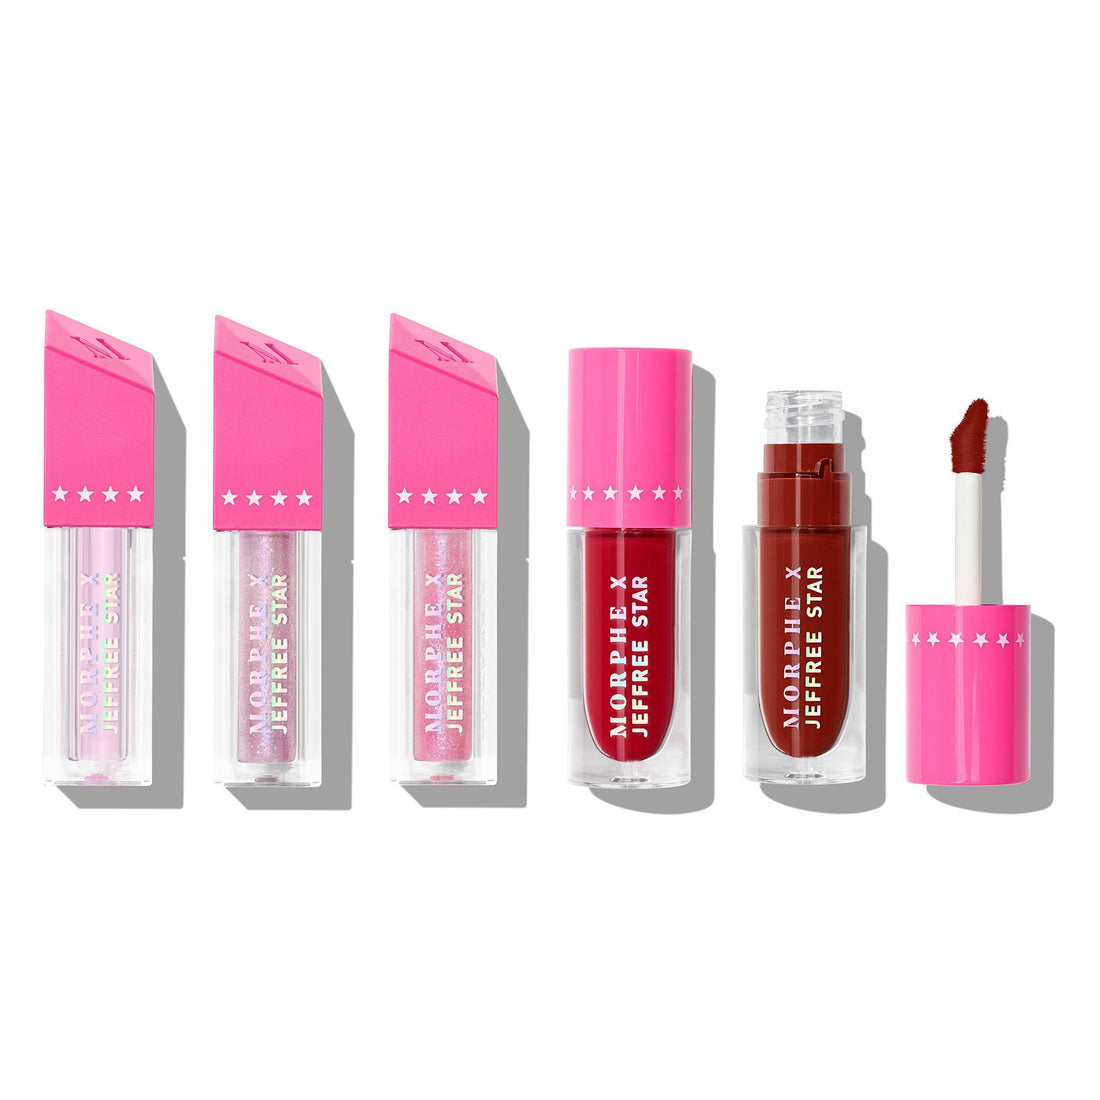 ICONIC BOLDS LIP COLLECTION